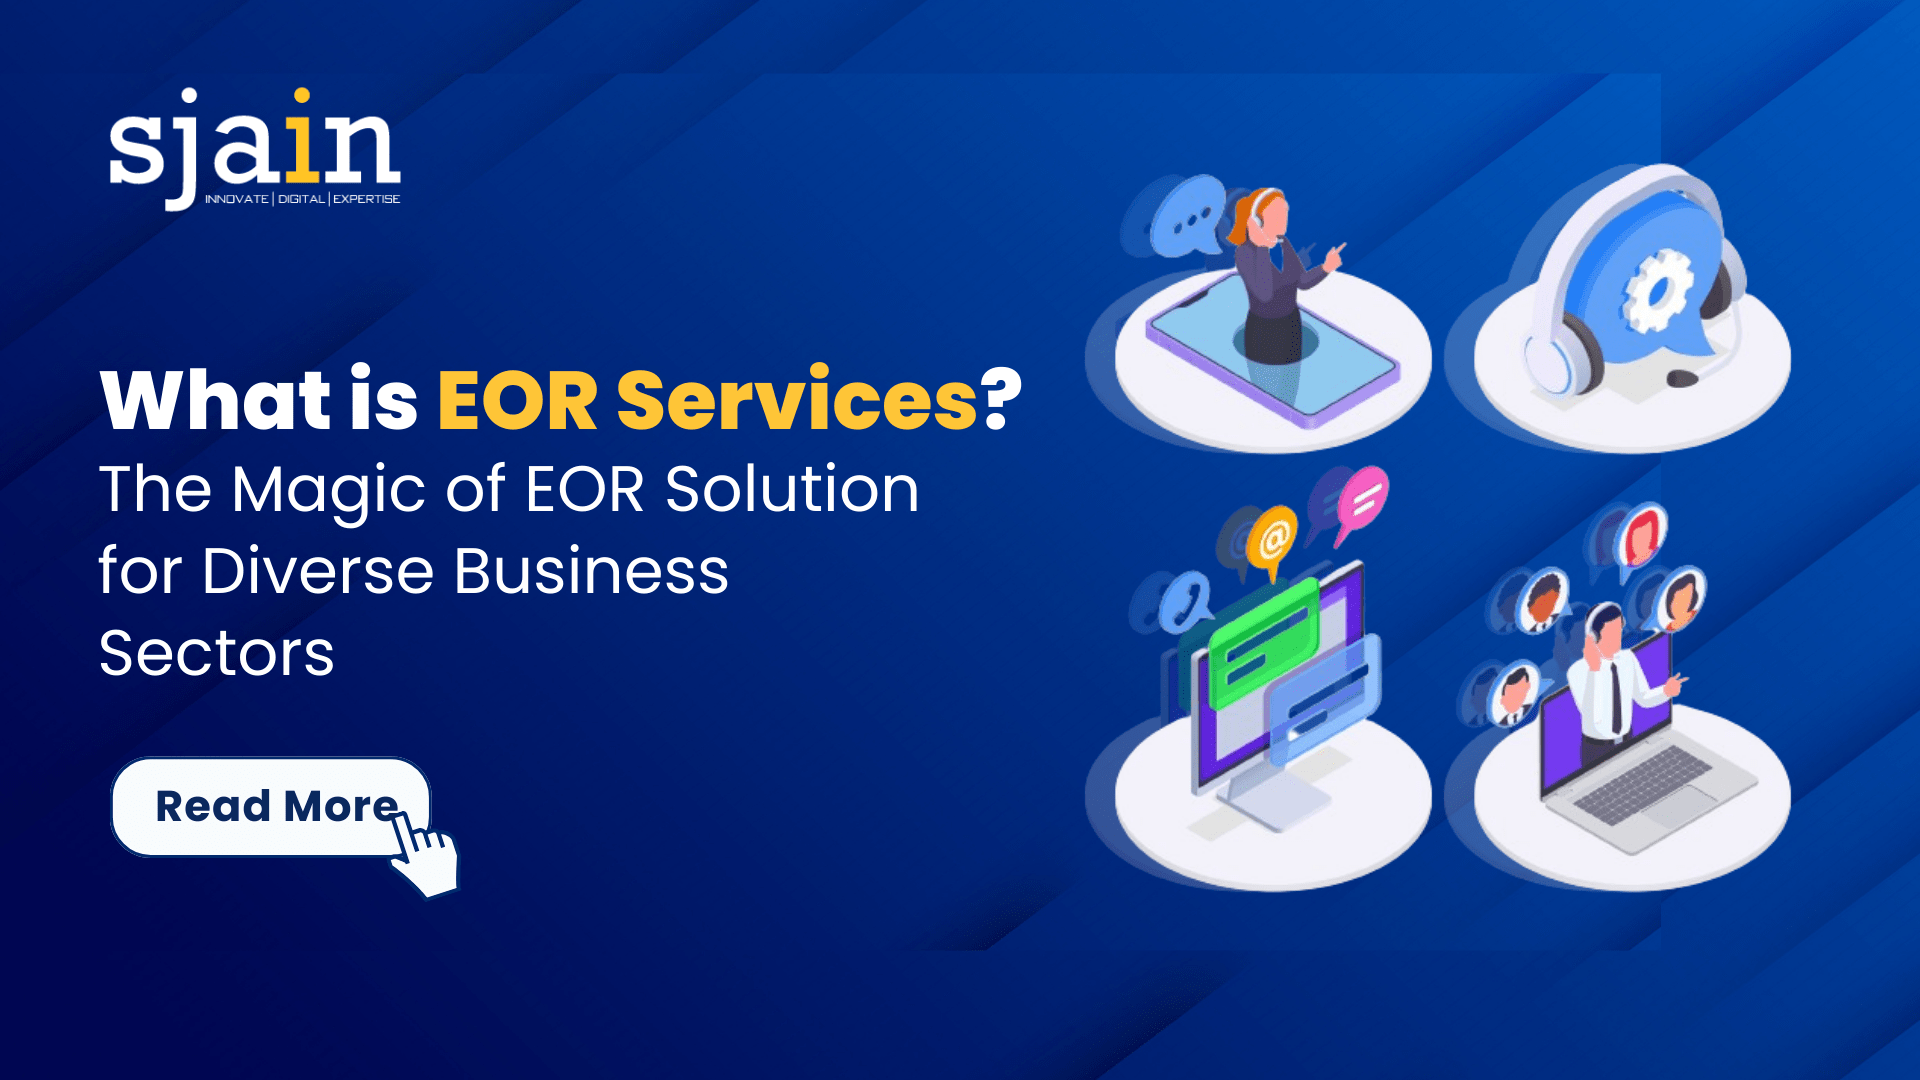 WHAT IS EOR SERVICES? HOW IT’S HELPFUL FOR BUSINESSES EXPANDING GLOBALLY?